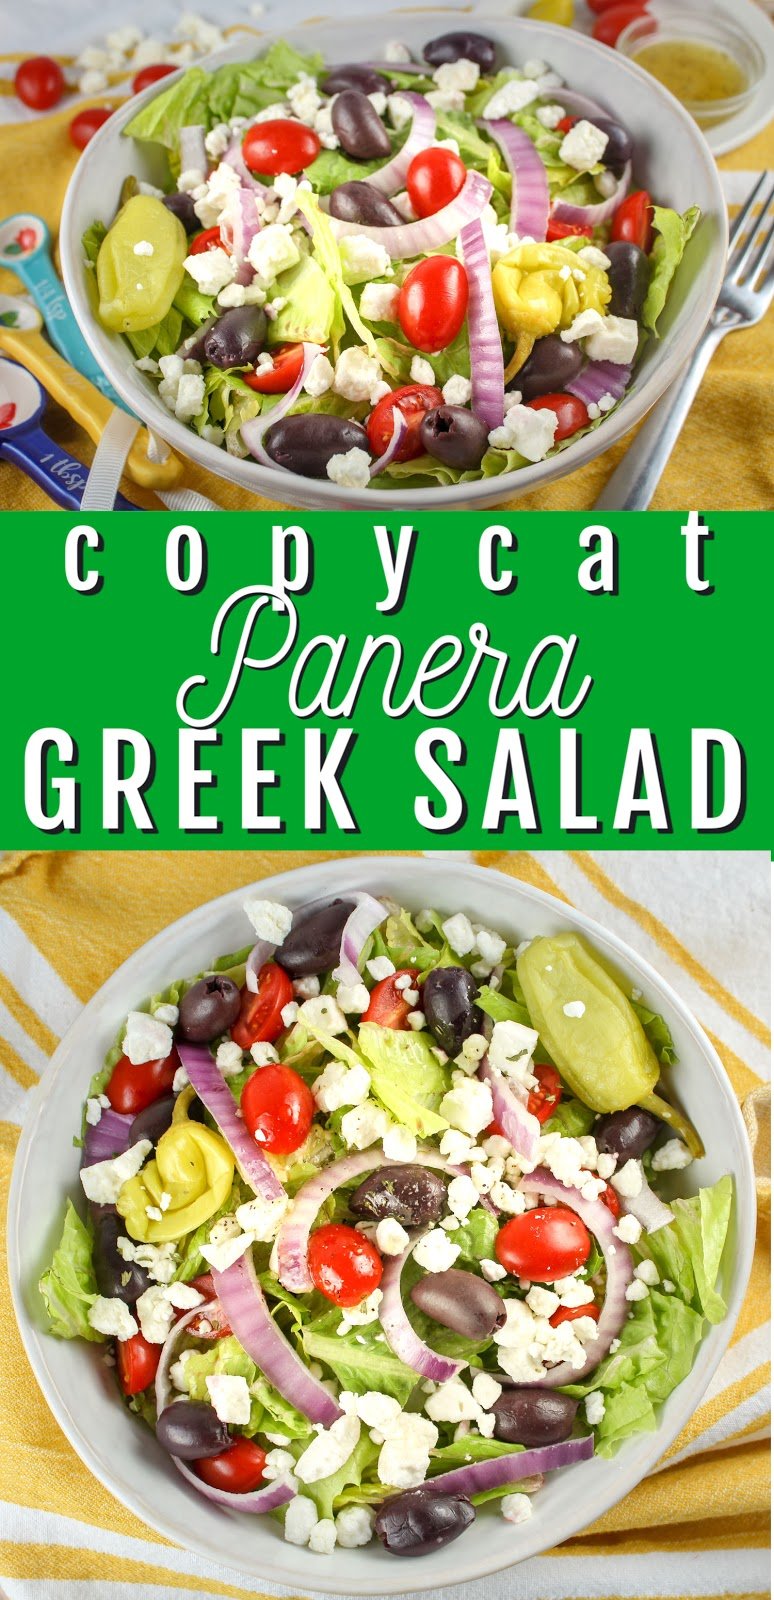 Panera might be known for bread but I love their salads!!!! The Panera Greek Salad is a classic and so delicious – their Greek dressing is also super simple to make!
 via @foodhussy